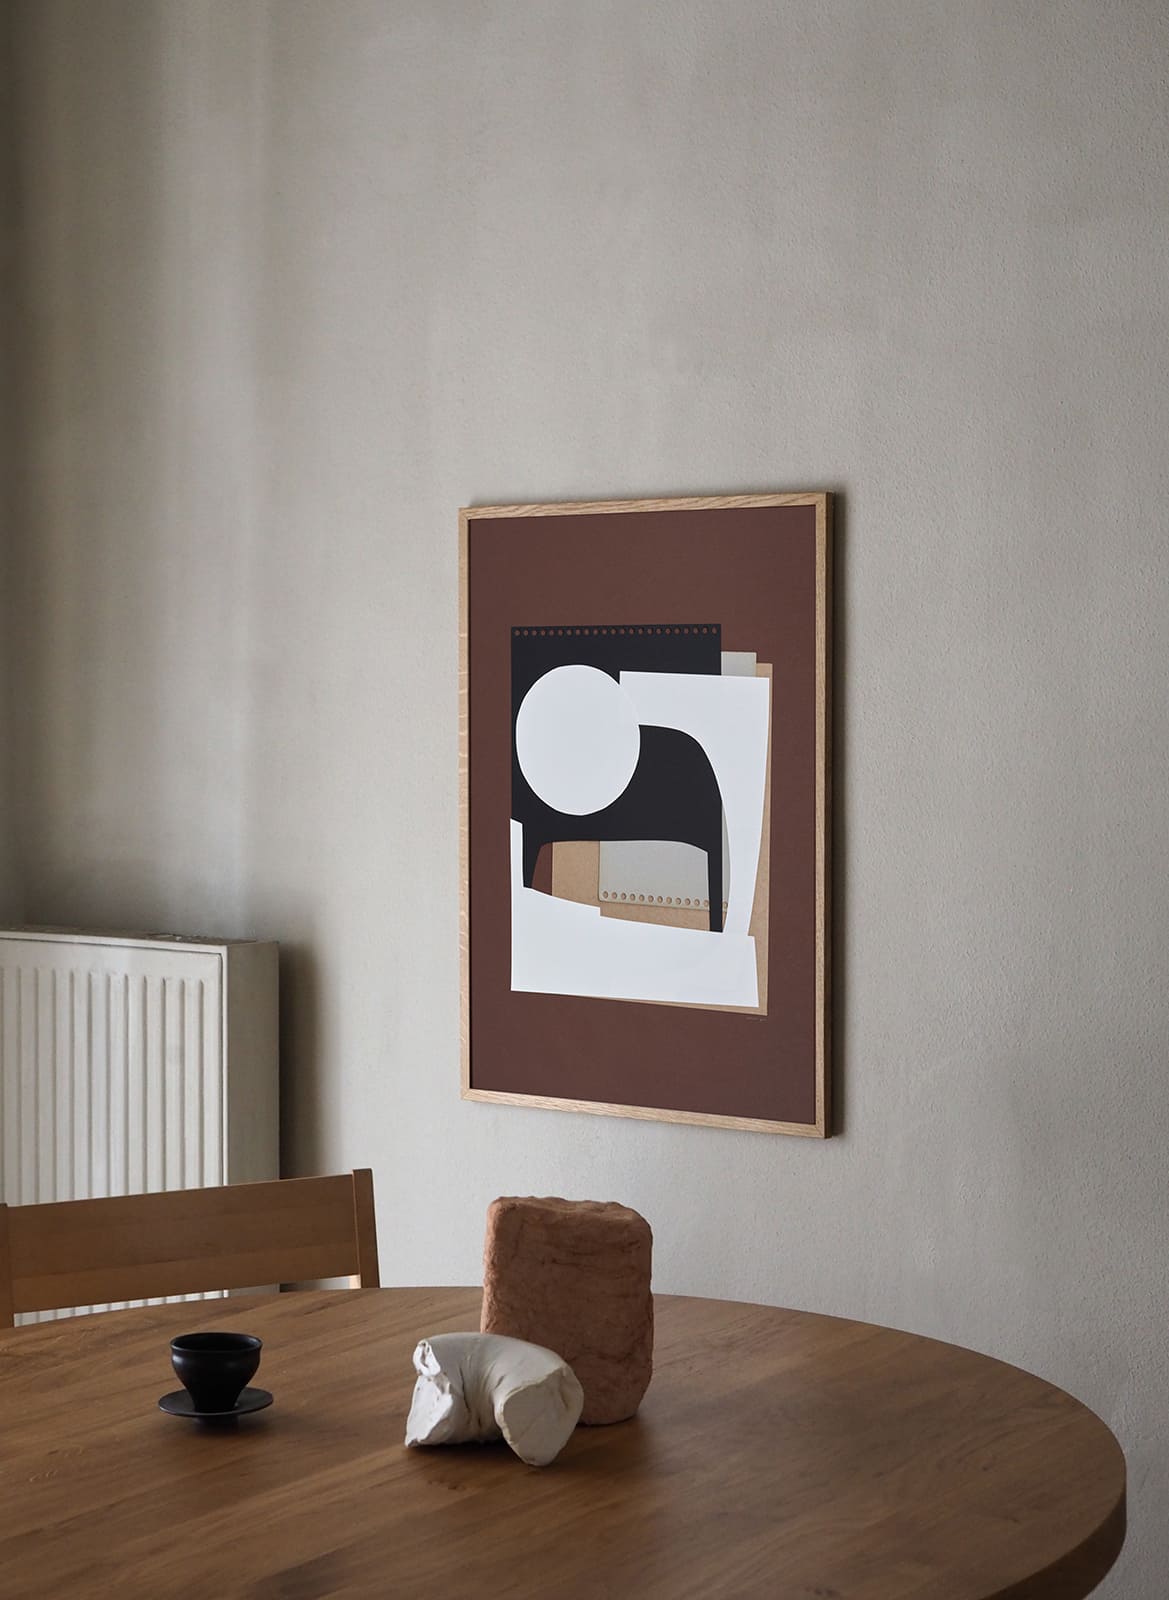  Framed minimalistic poster hanging above dining table by Atelier Cph